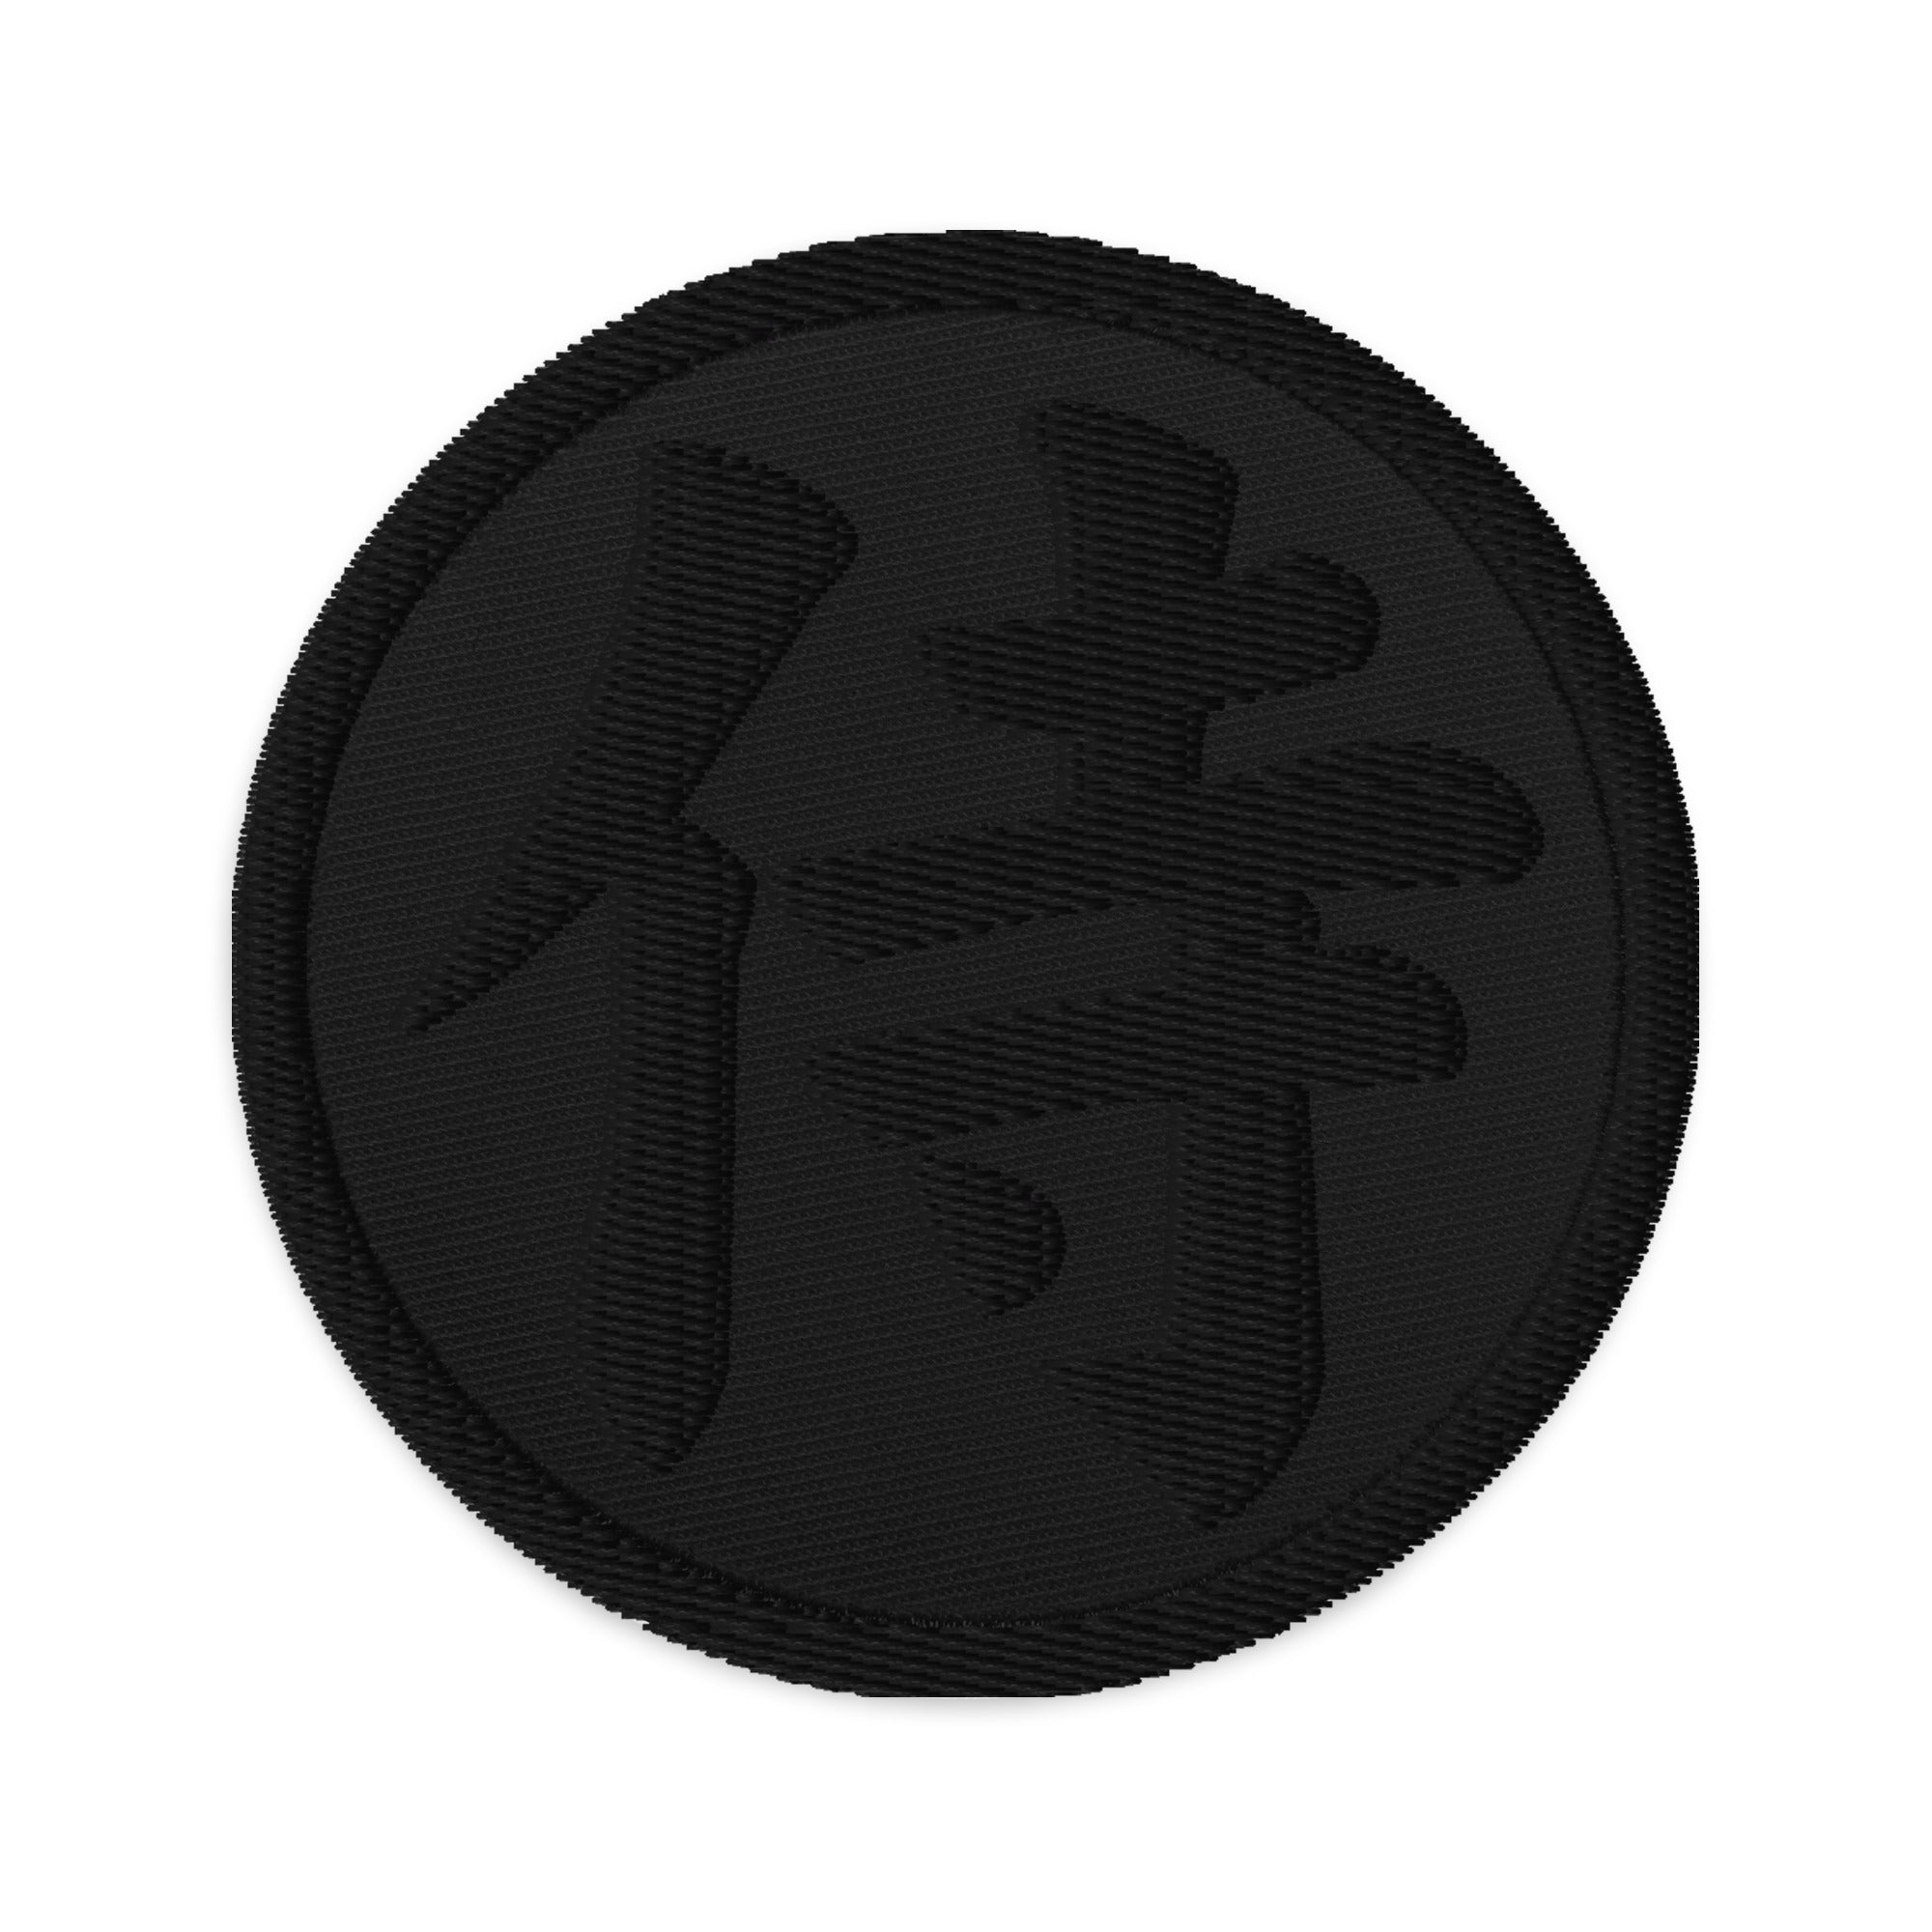 Samurai The Japanese Kanji Symbol Embroidered Patch Black Thread Patches - Edge of Life Designs